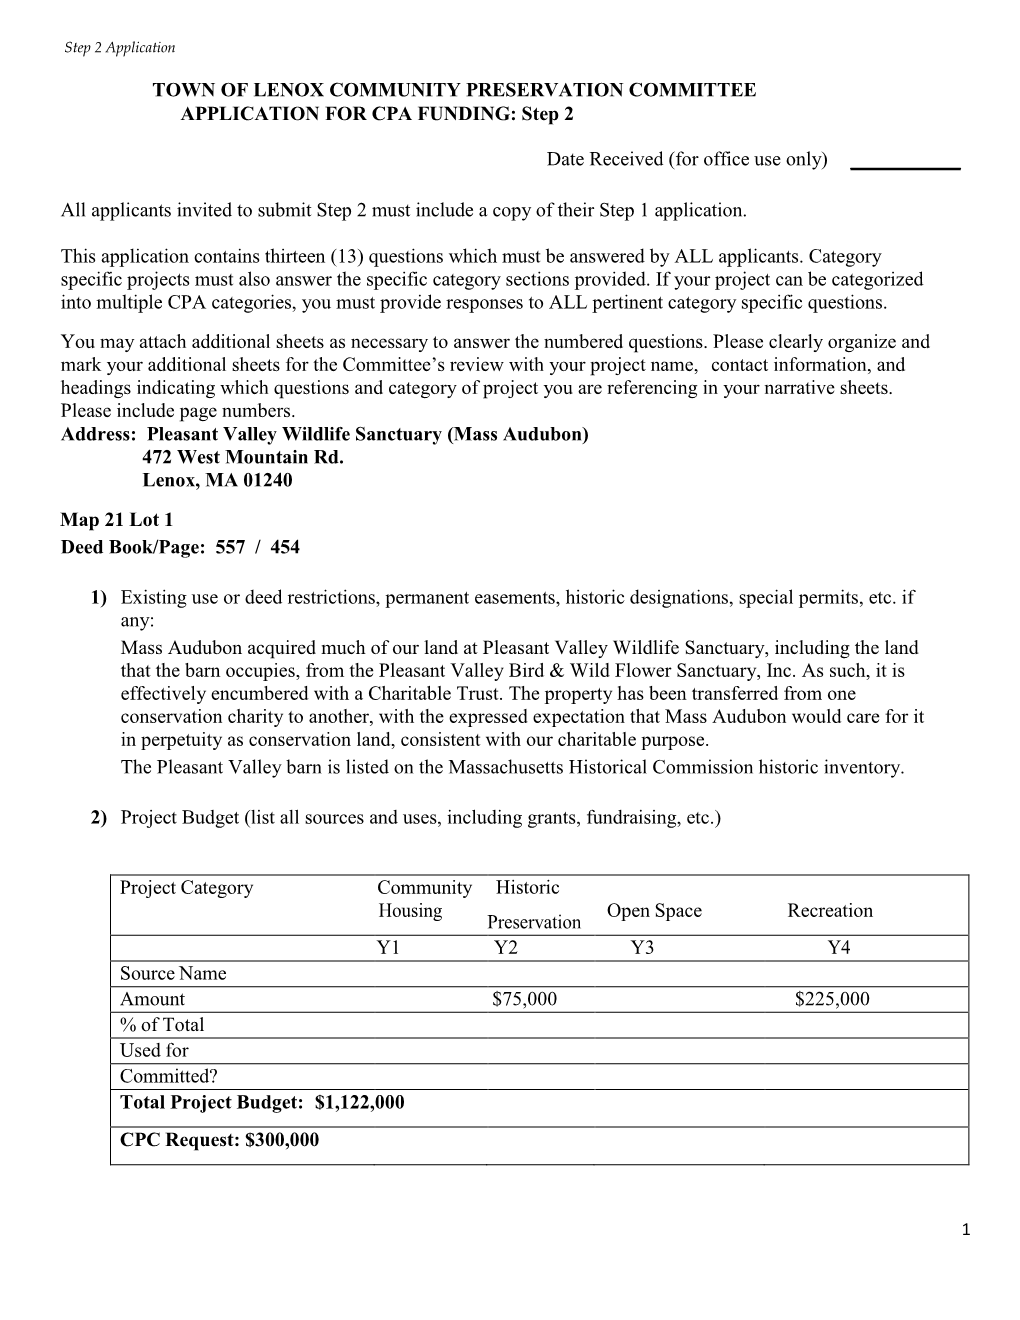 TOWN of LENOX COMMUNITY PRESERVATION COMMITTEE APPLICATION for CPA FUNDING: Step 2